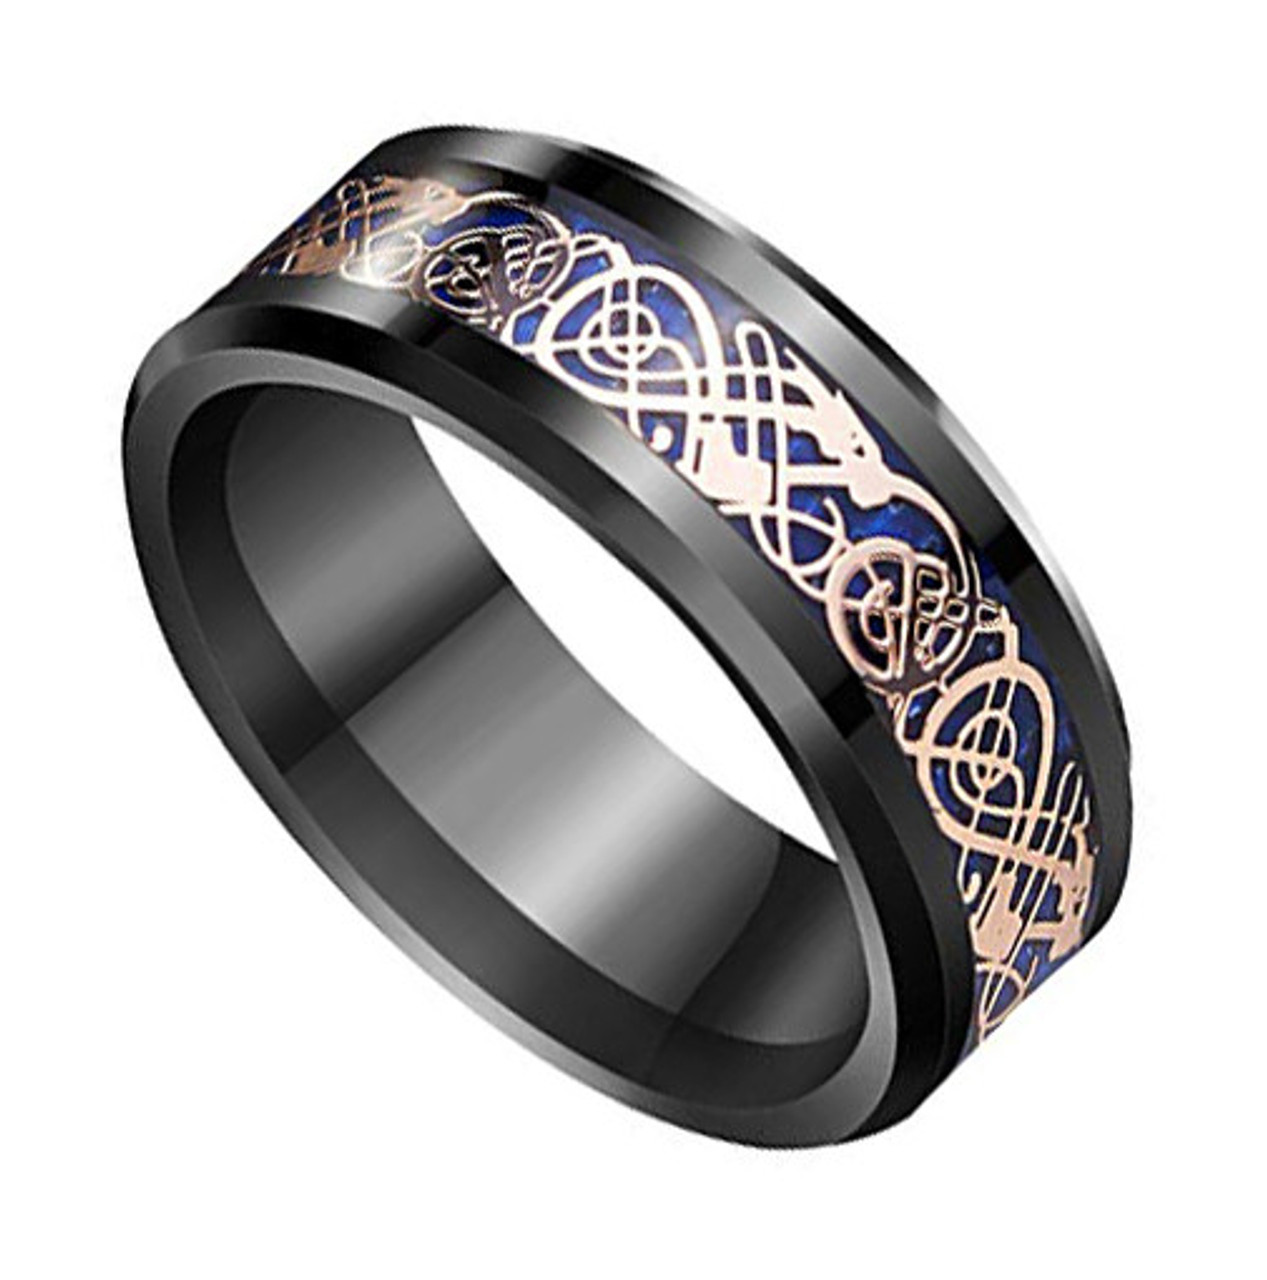 Men's Tungsten Wedding Band (8mm). Celtic Wedding Band - Black with Rose Gold Celtic Knot over Blue Carbon Fiber Inlay